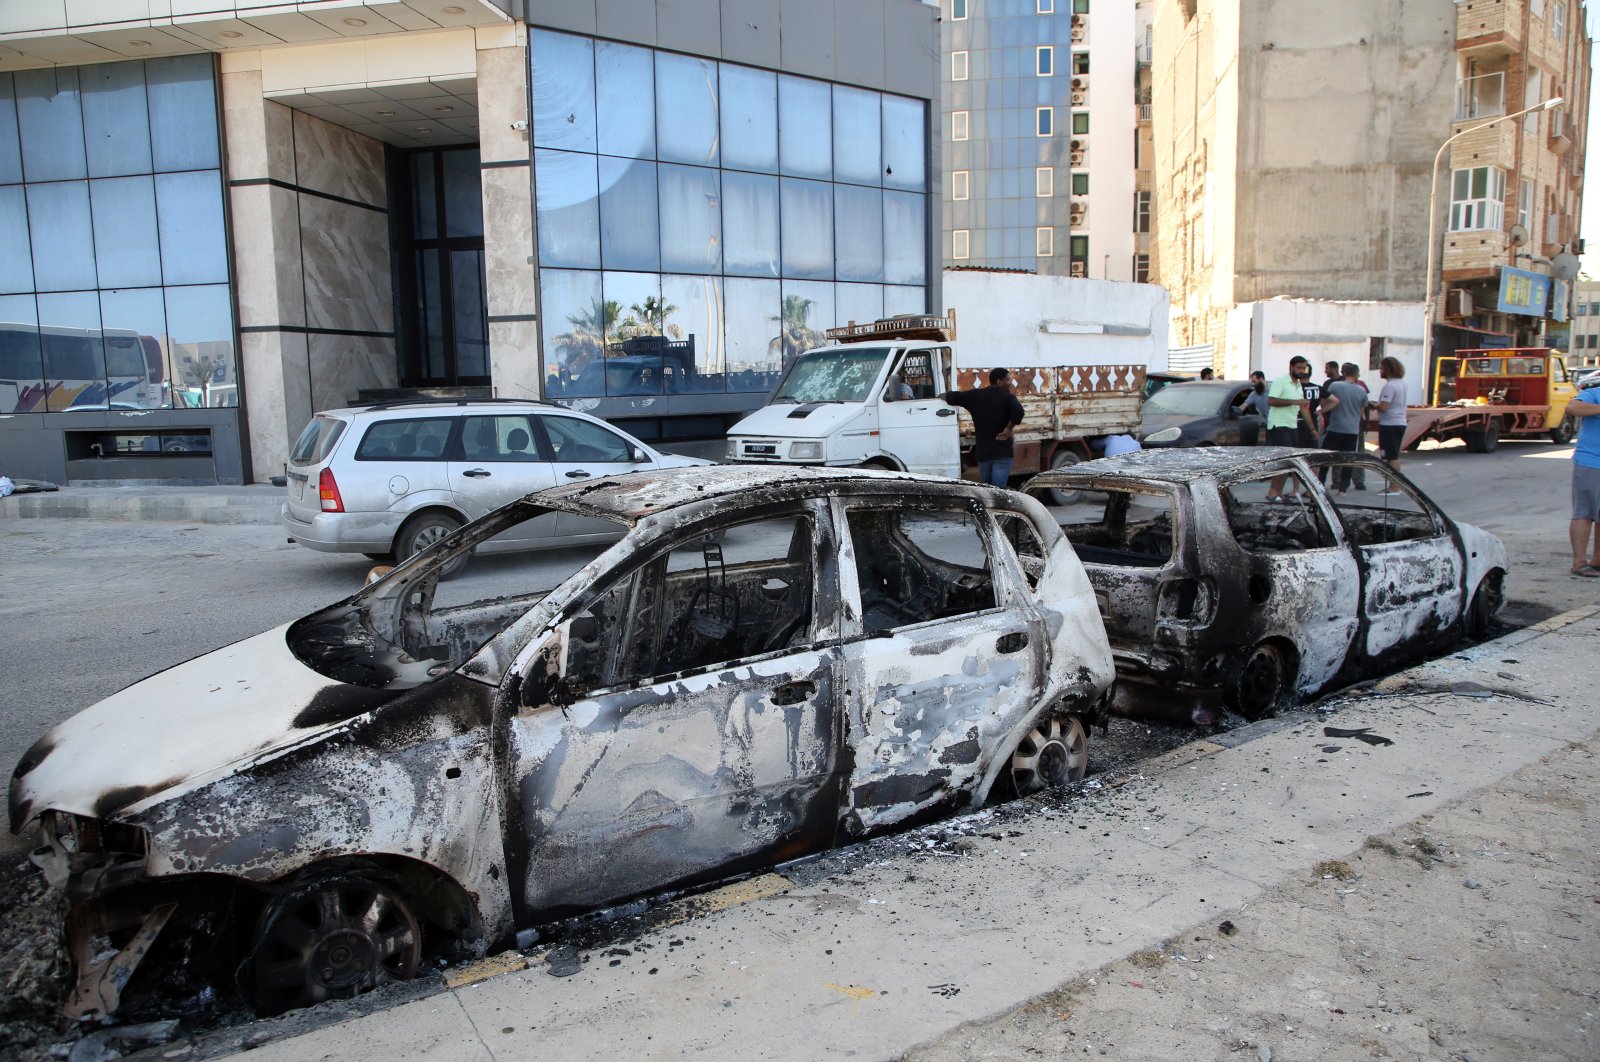 Vehicles damaged after overnight clashes between fighters loyal the Tripoli-based government and the Tobruk-based one in Tripoli, Libya, 17 May 2022. (EPA)